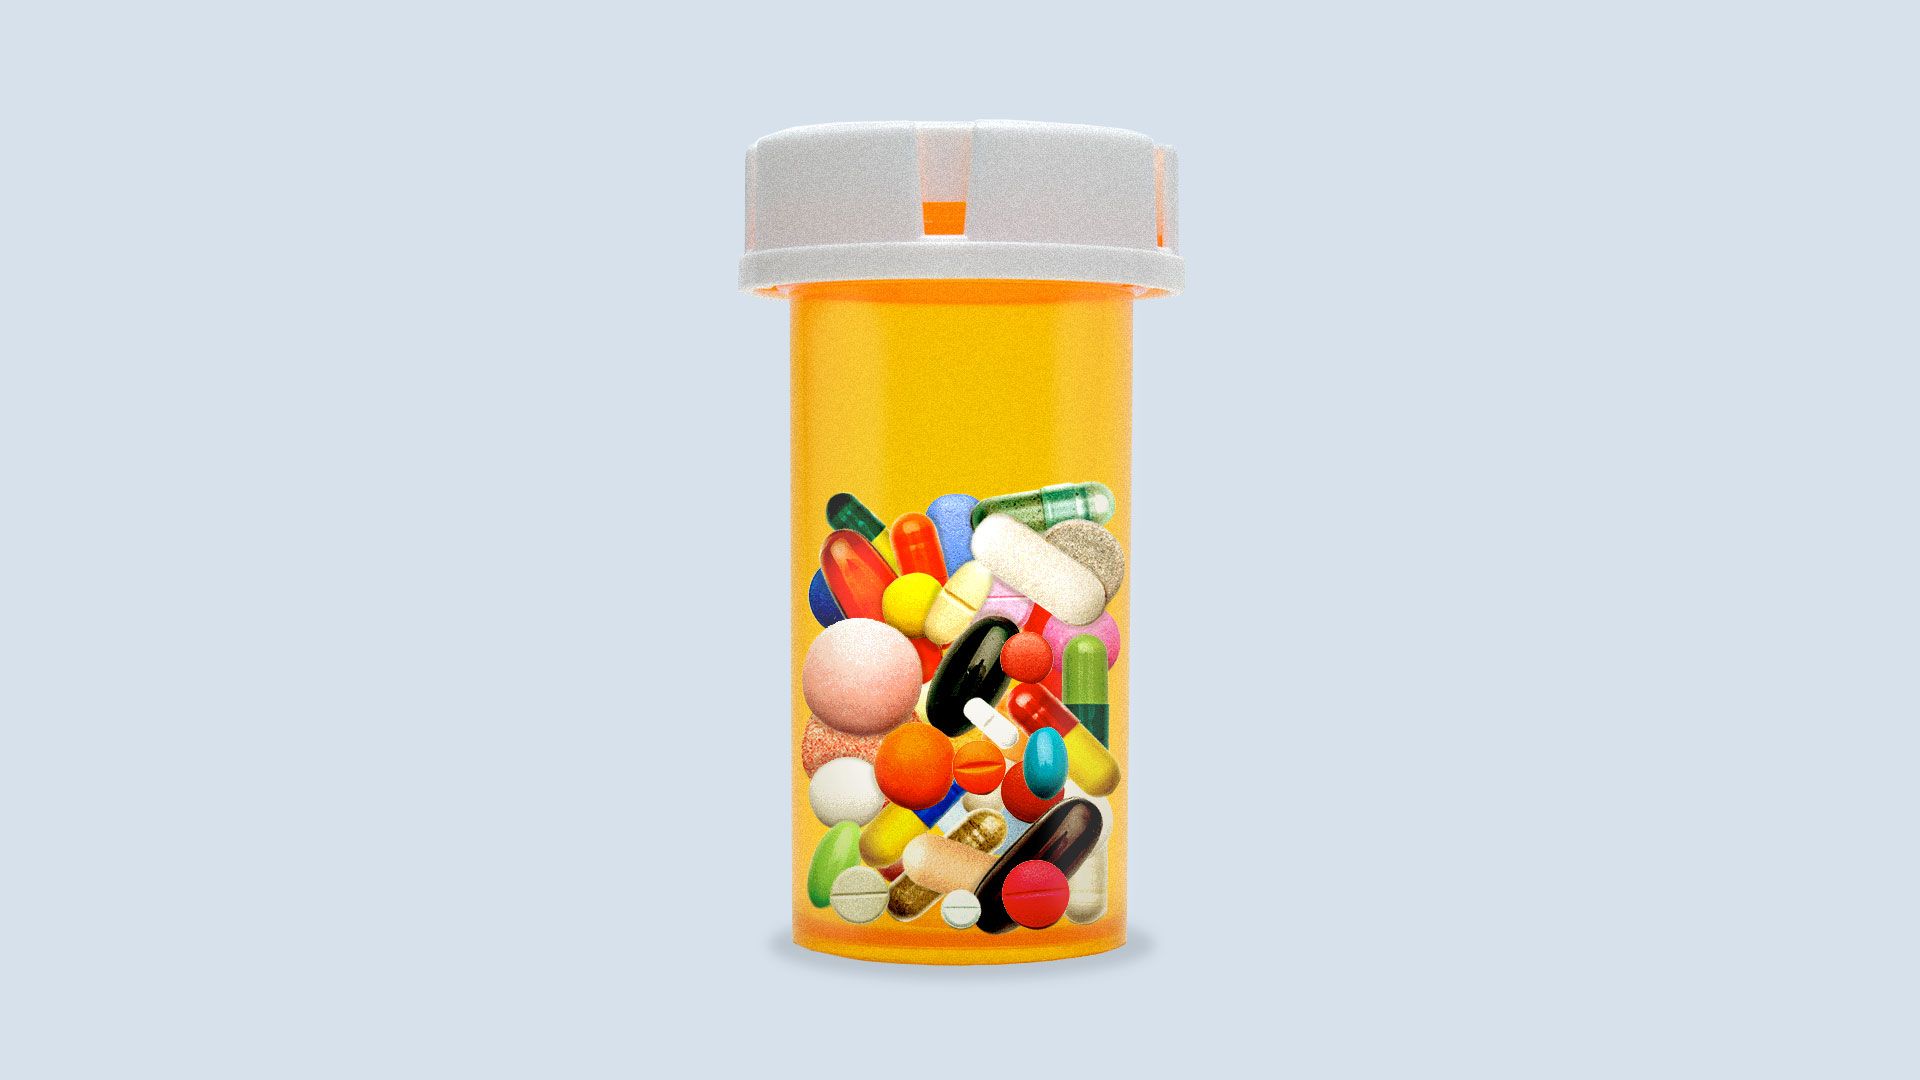 Illustration of a pill bottle filled with different colors, sizes and shapes of pills in it